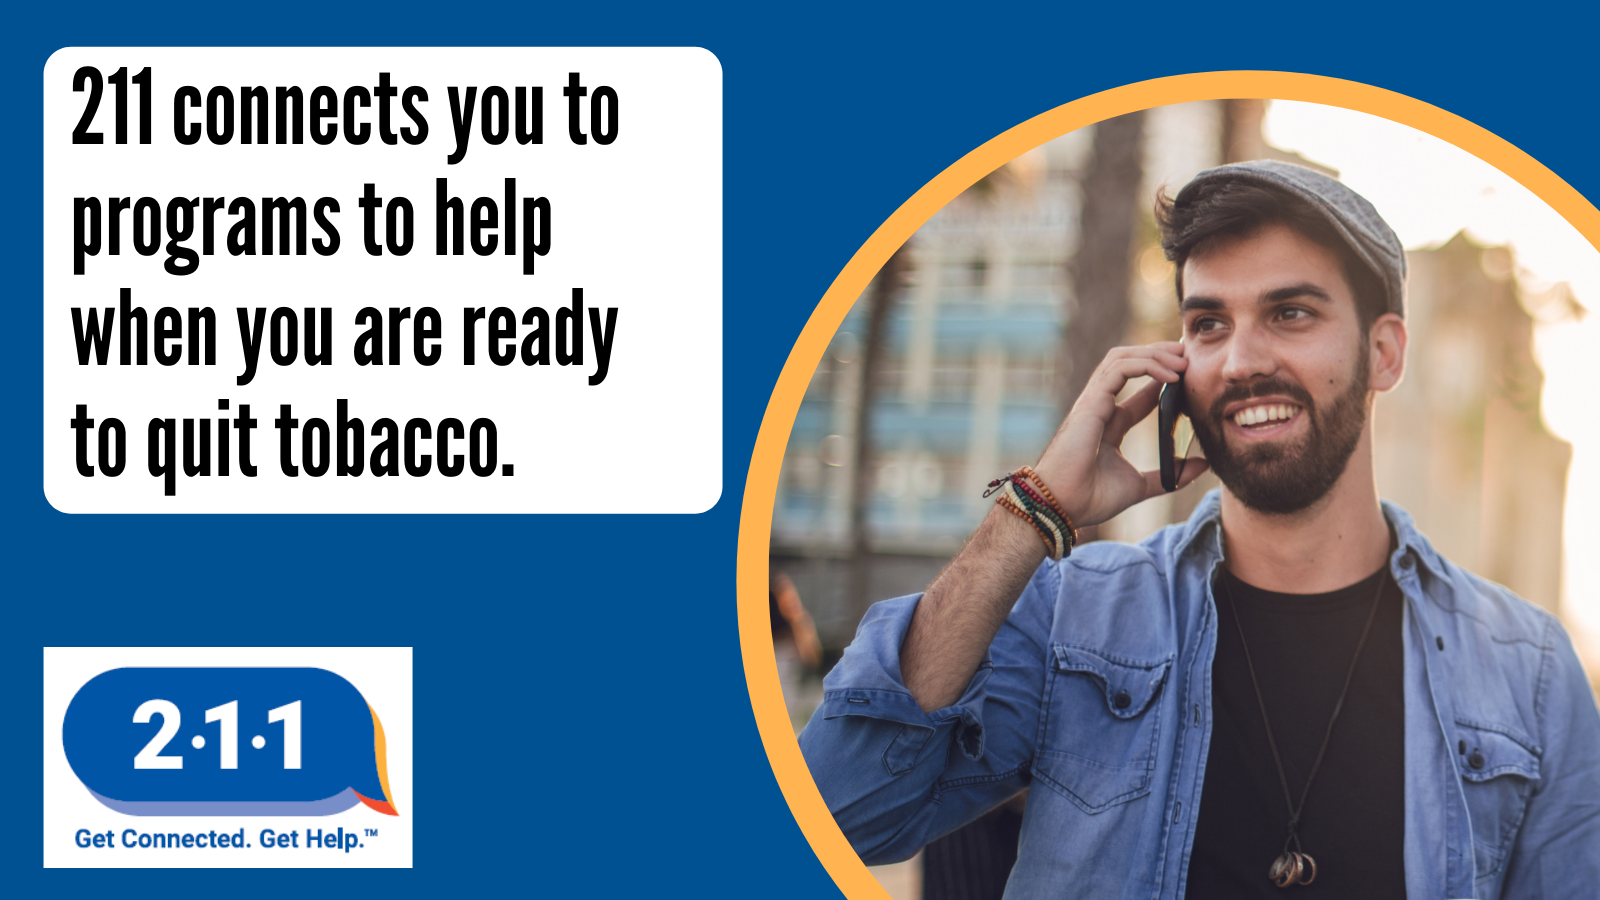 Person on phone and text: 211 connects you to programs to help when you are ready to quit tobacco. 2-1-1